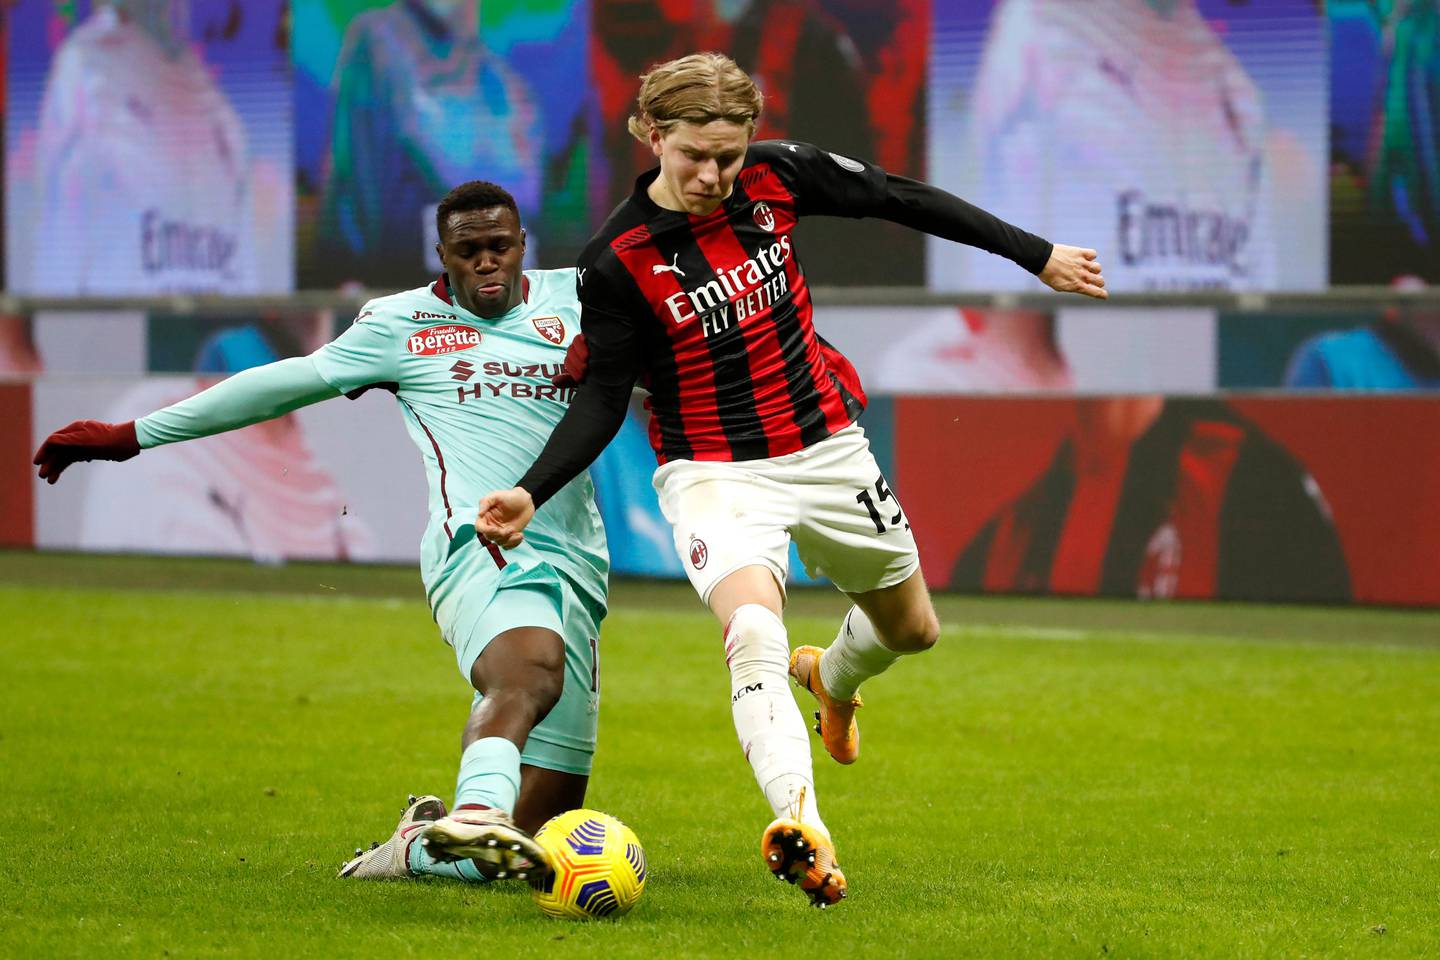 Torino's Wilfried Singo, left, fights for the ball with AC Milan's Jens Petter Hauge during the Serie A soccer match between AC Milan and Torino at the San Siro stadium in Milan, Italy, Saturday, Jan. 9, 2021. (AP Photo/Antonio Calanni)